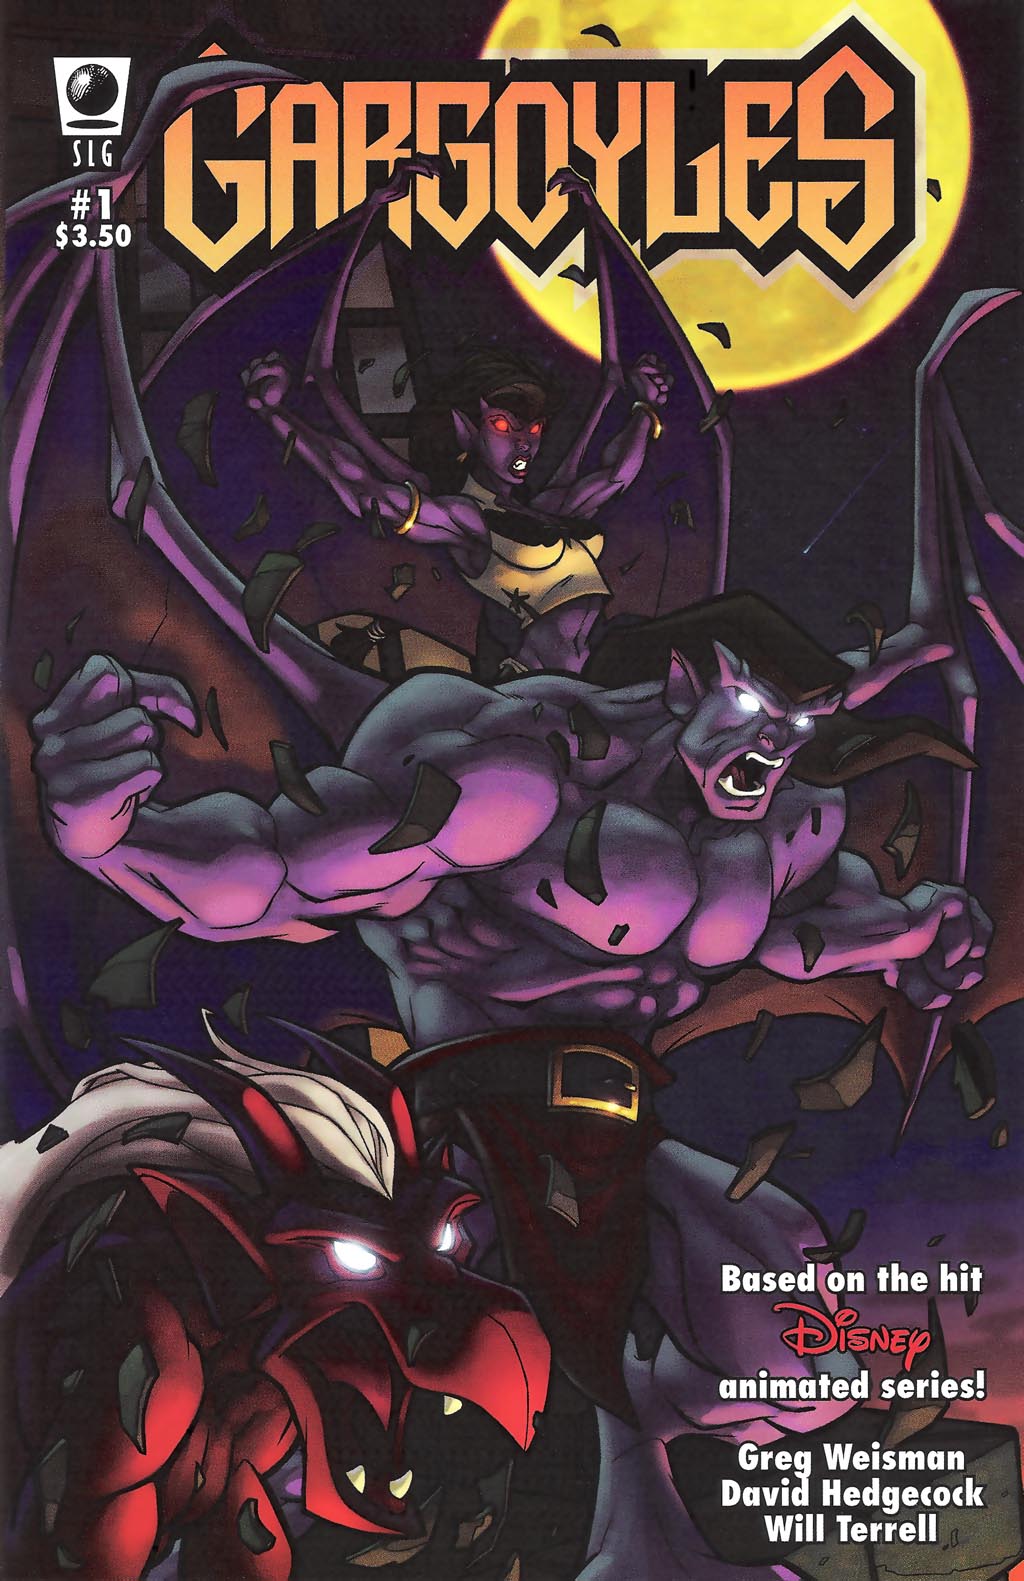 Read online Gargoyles (2006) comic - Issue #1 - 1. Online read comic and do...